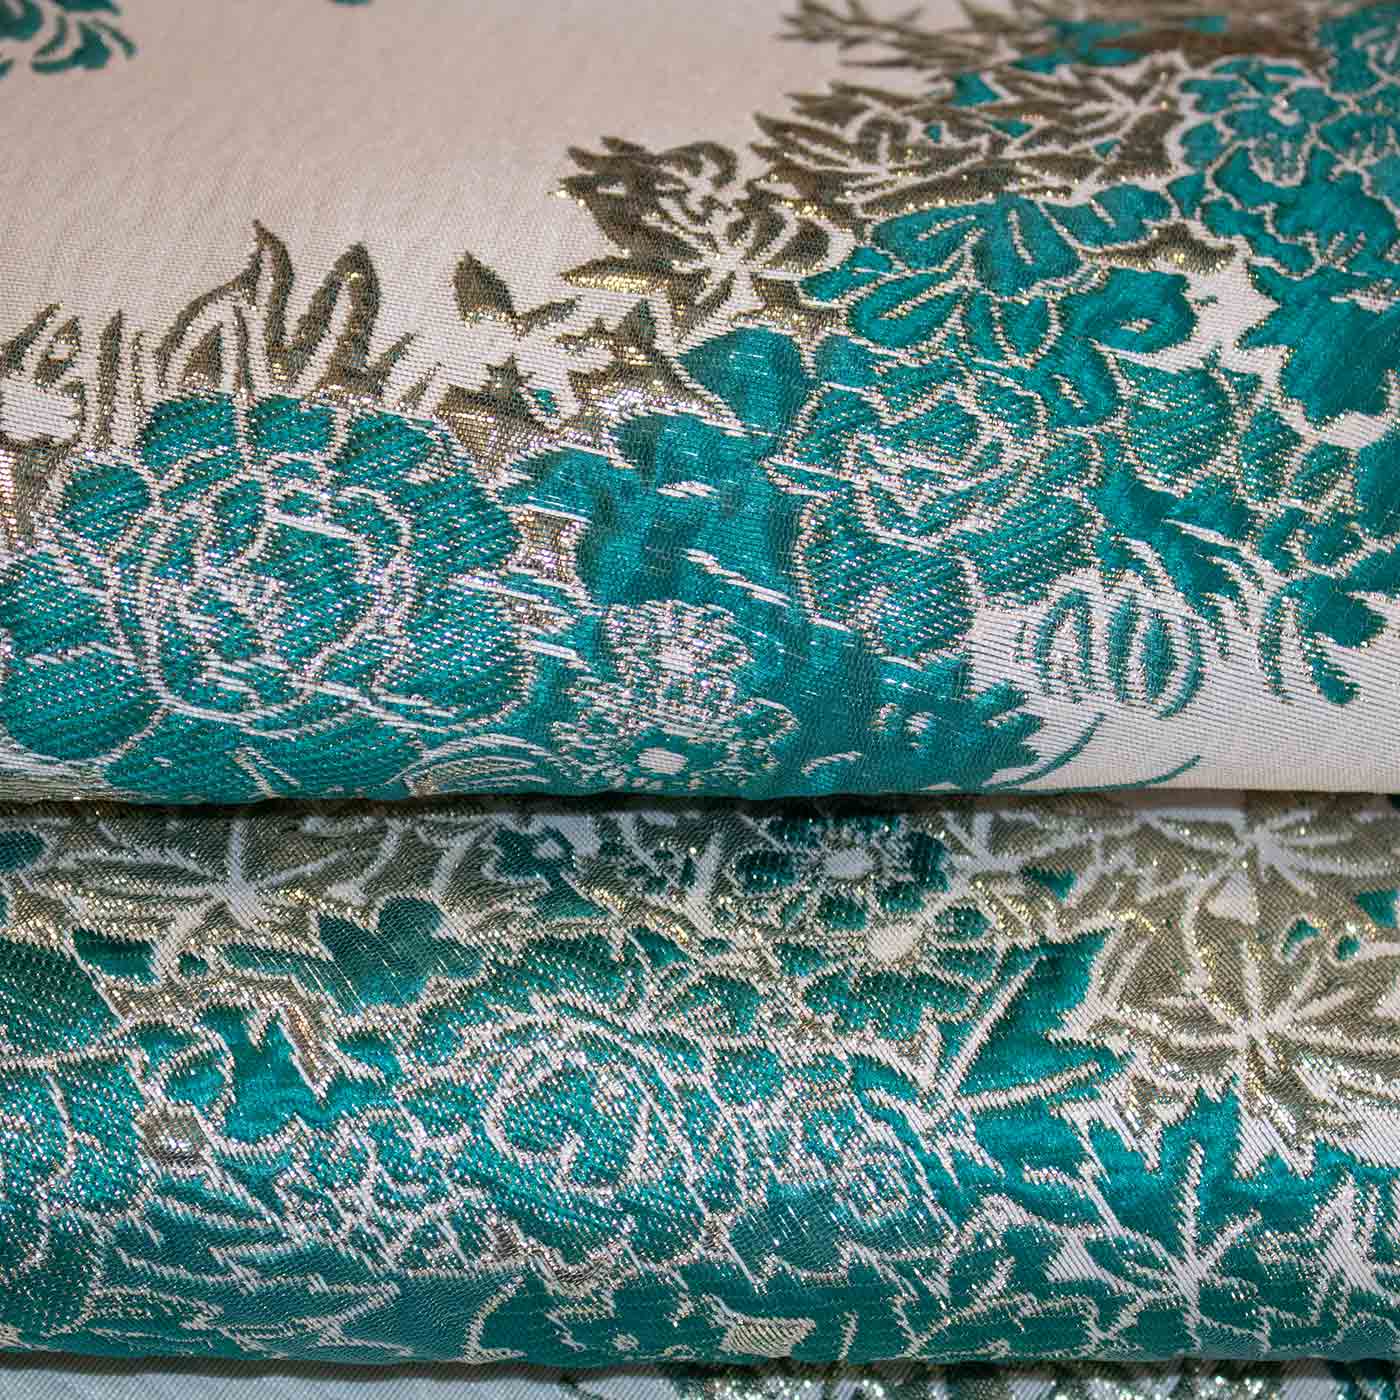 Emerald Green and Gold Abstract Floral Brocade Fabric